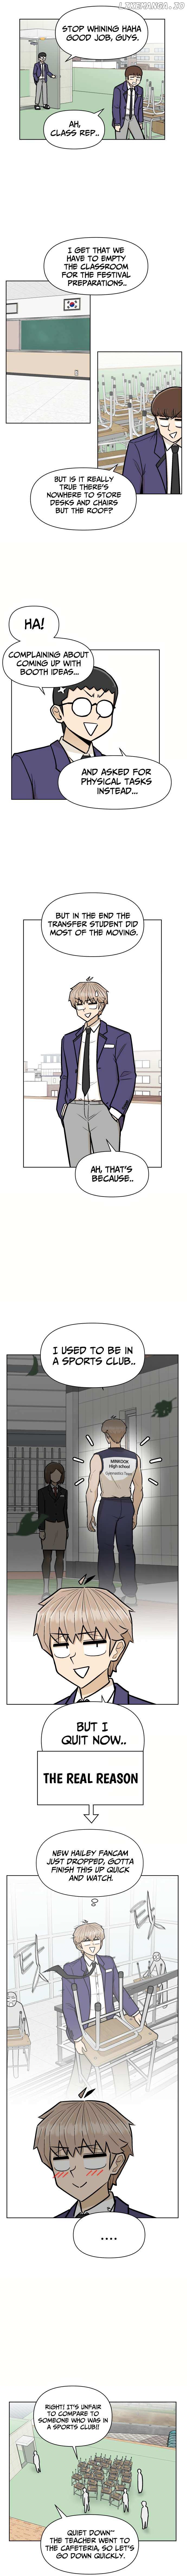 School of Streets Chapter 1 - page 9